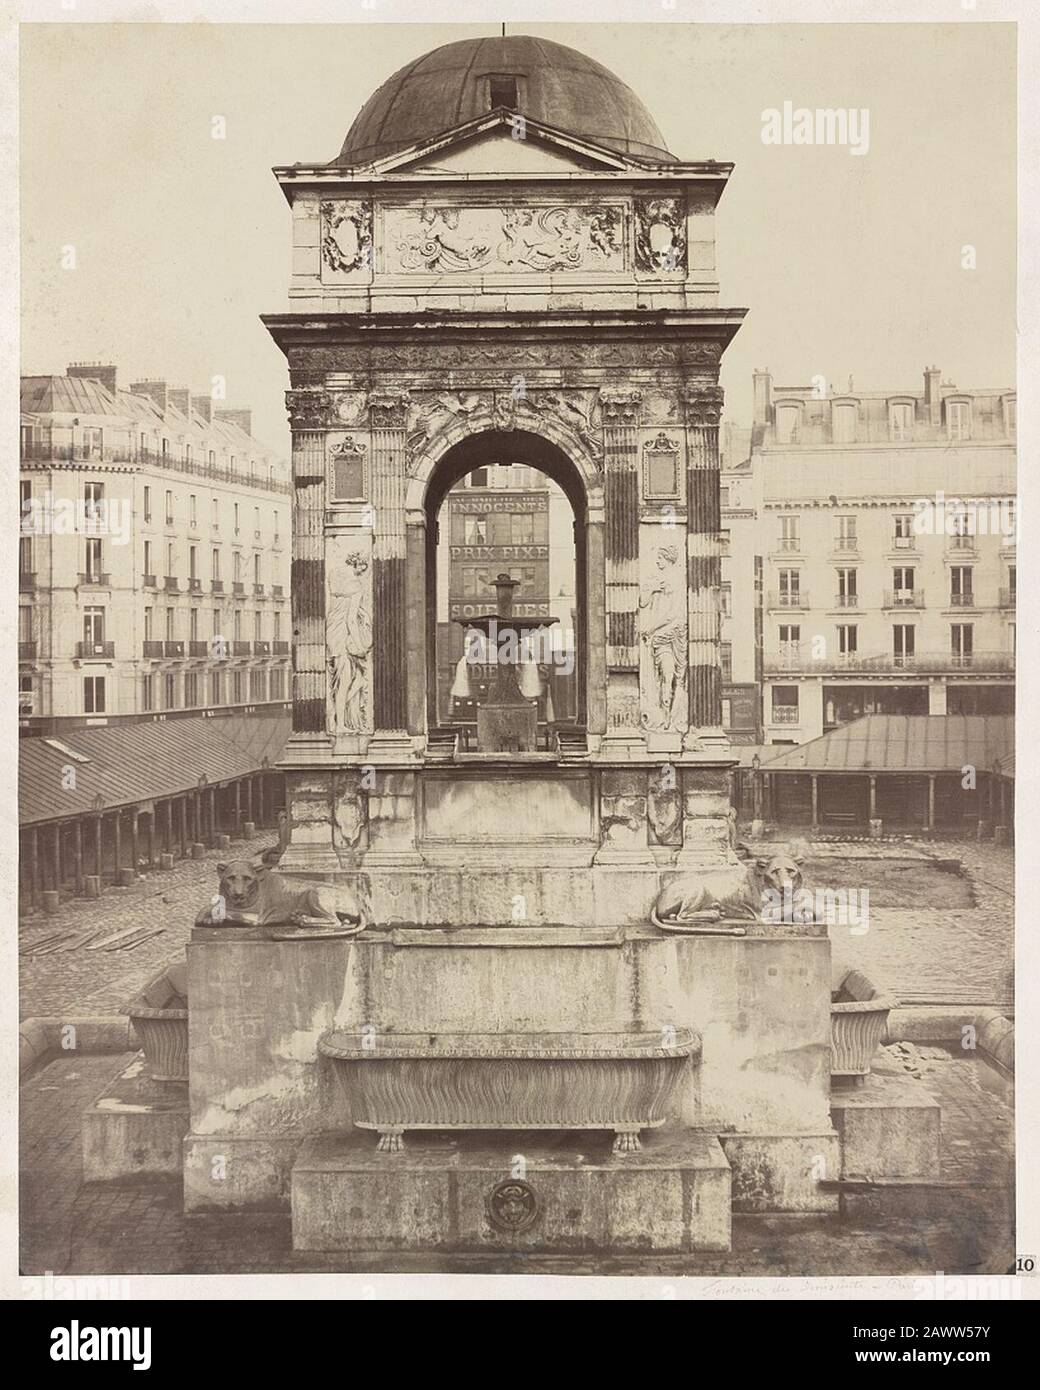 Fountain of the Innocents, Paris, France) - Ch. Marville Stock Photo